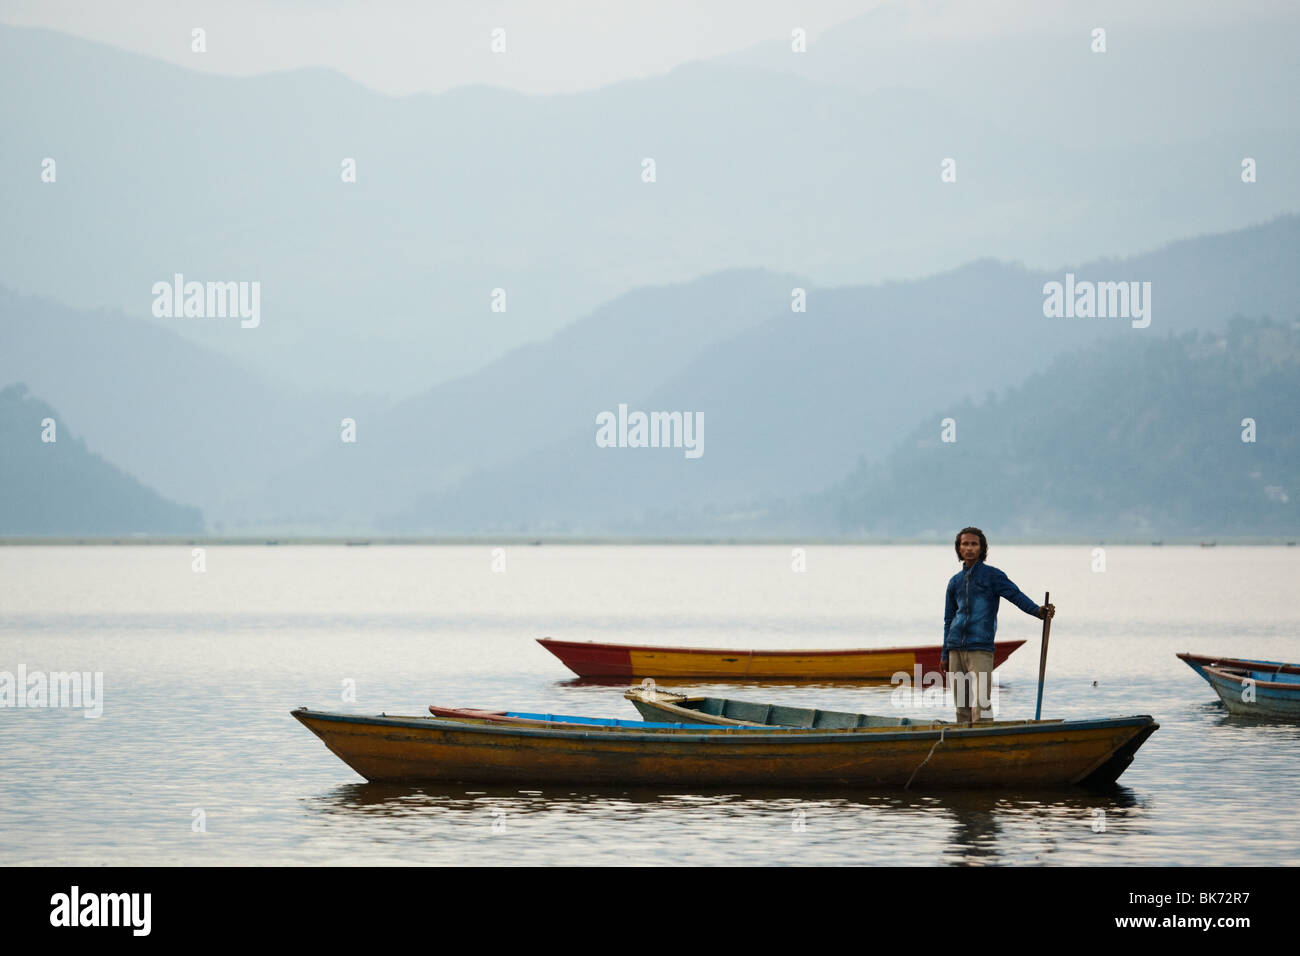 A man stands in a canoe on Pewha Lake in Pokhara, Nepal on Monday October 26, 2009. Stock Photo